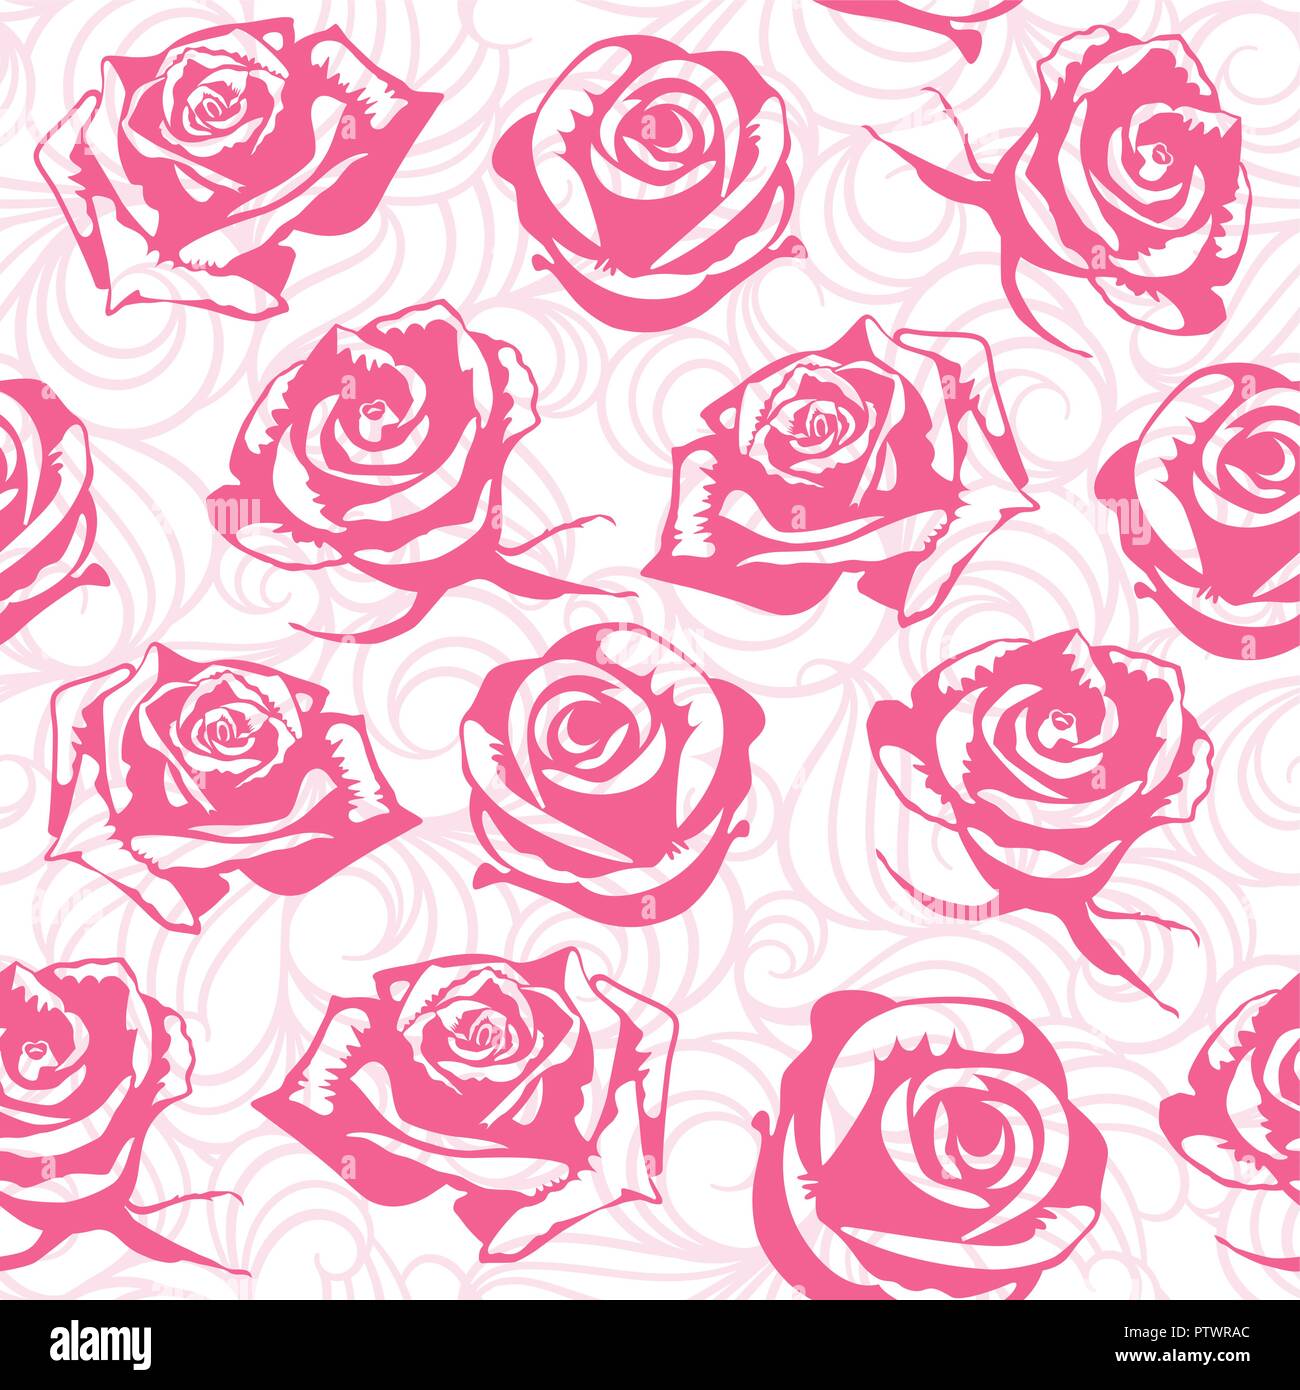 Seamless floral background with roses Stock Vector